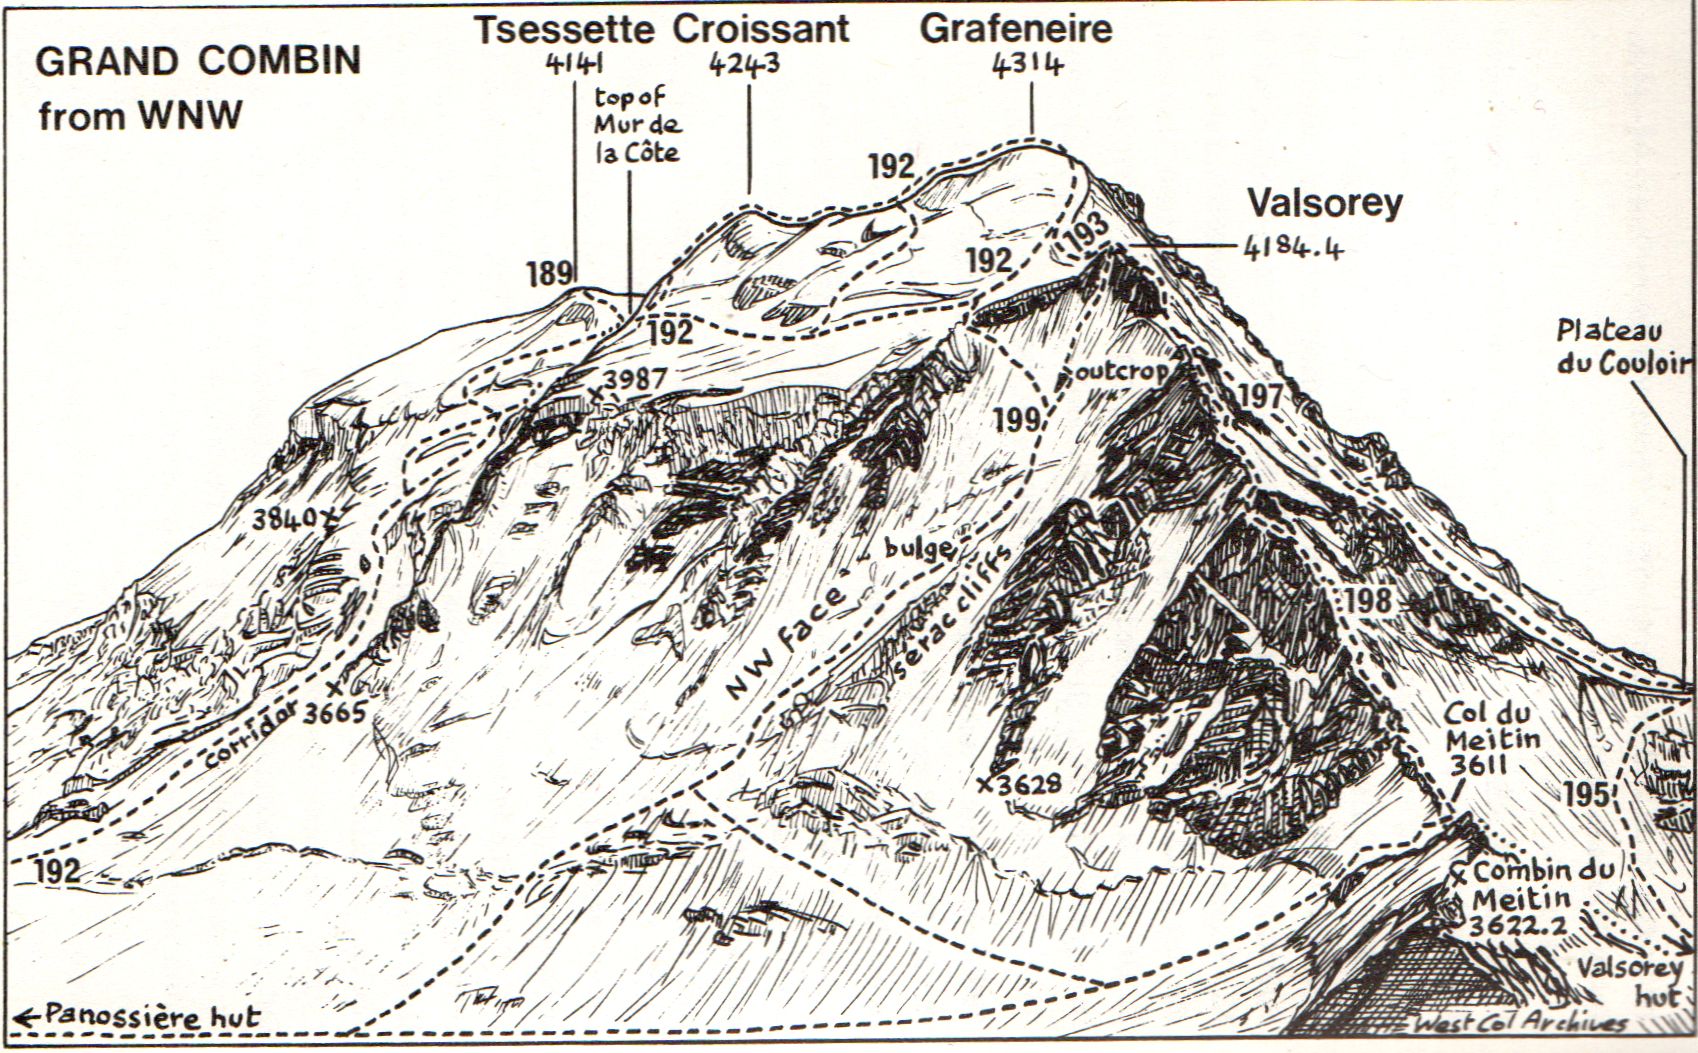 Grand Combin North side - ascent routes